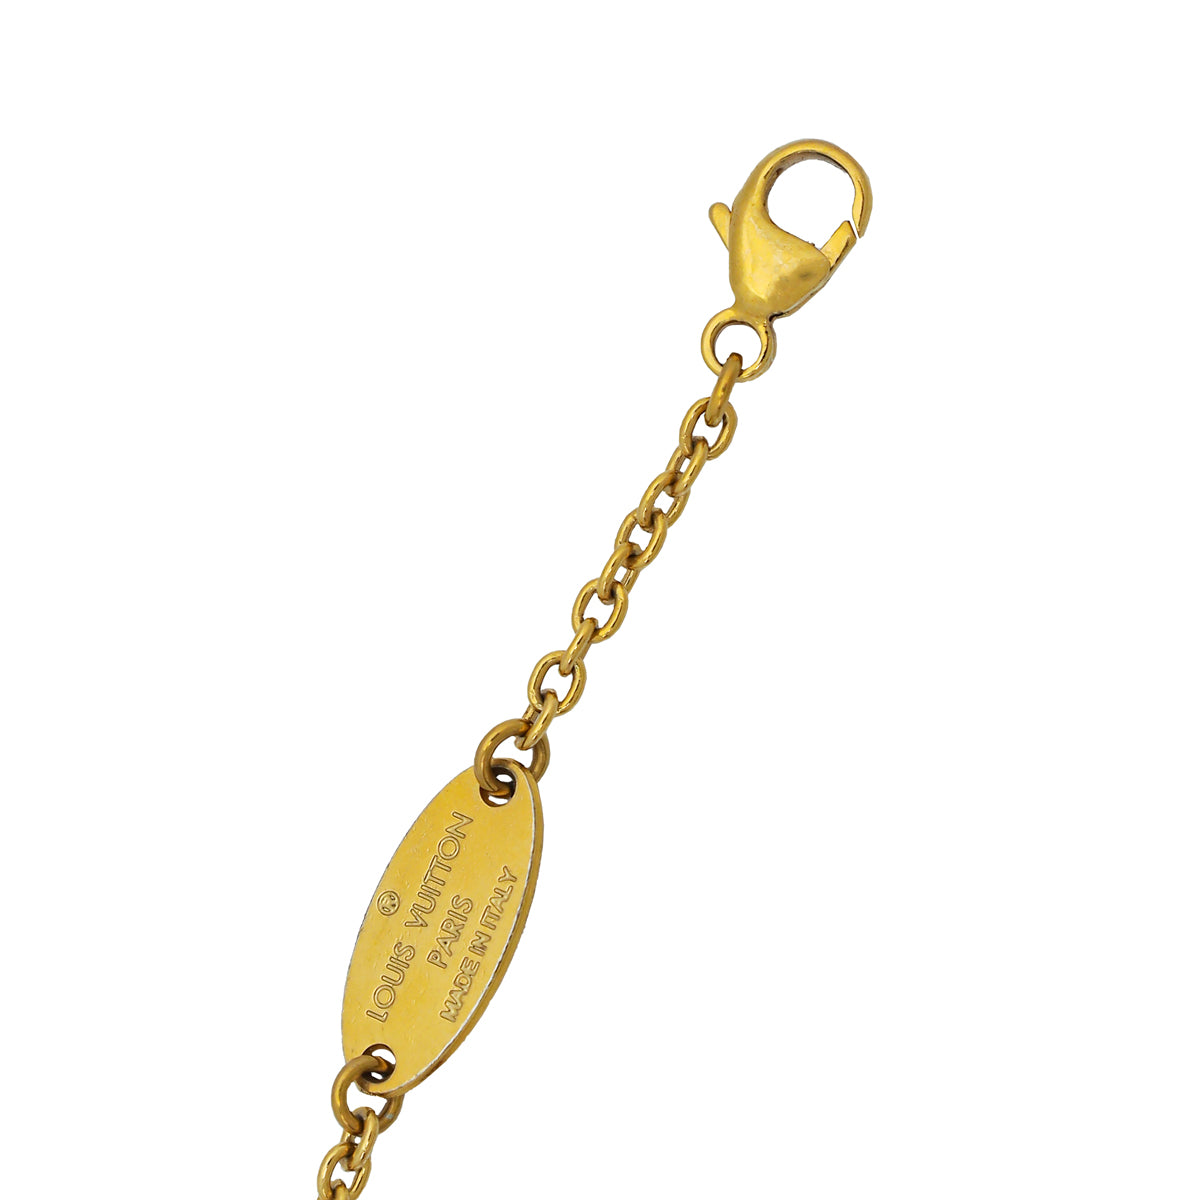 Louis Vuitton x Fornasetti Keychain Gold in Gold Metal with Gold